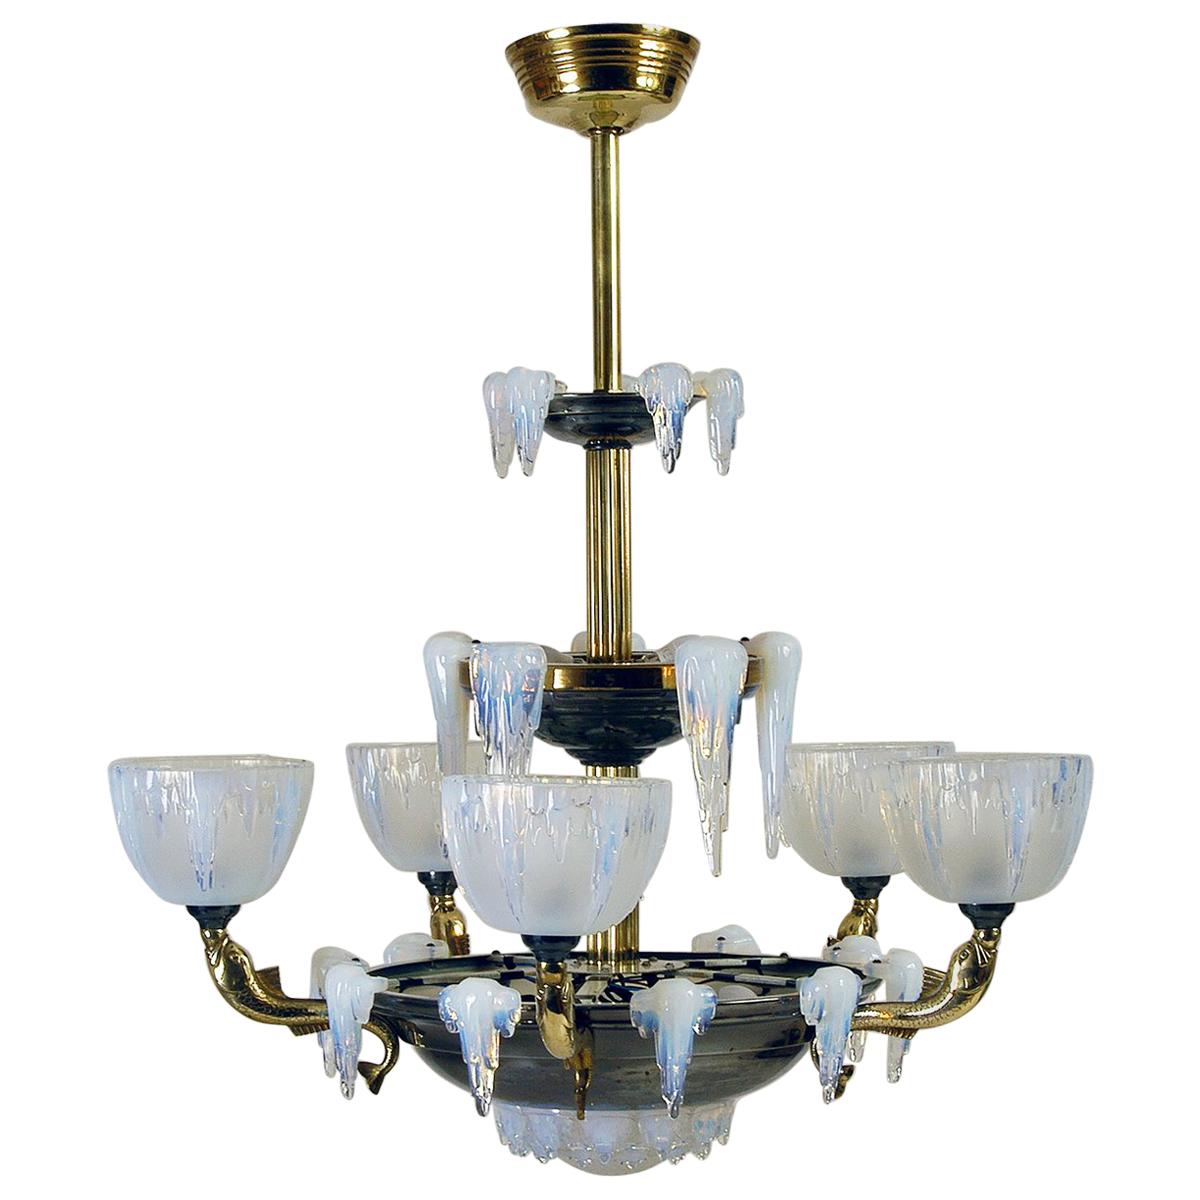 1930s French Art Deco Opalescent Ezan Glass ‘Icicle’ Chandelier by Henri Petitot